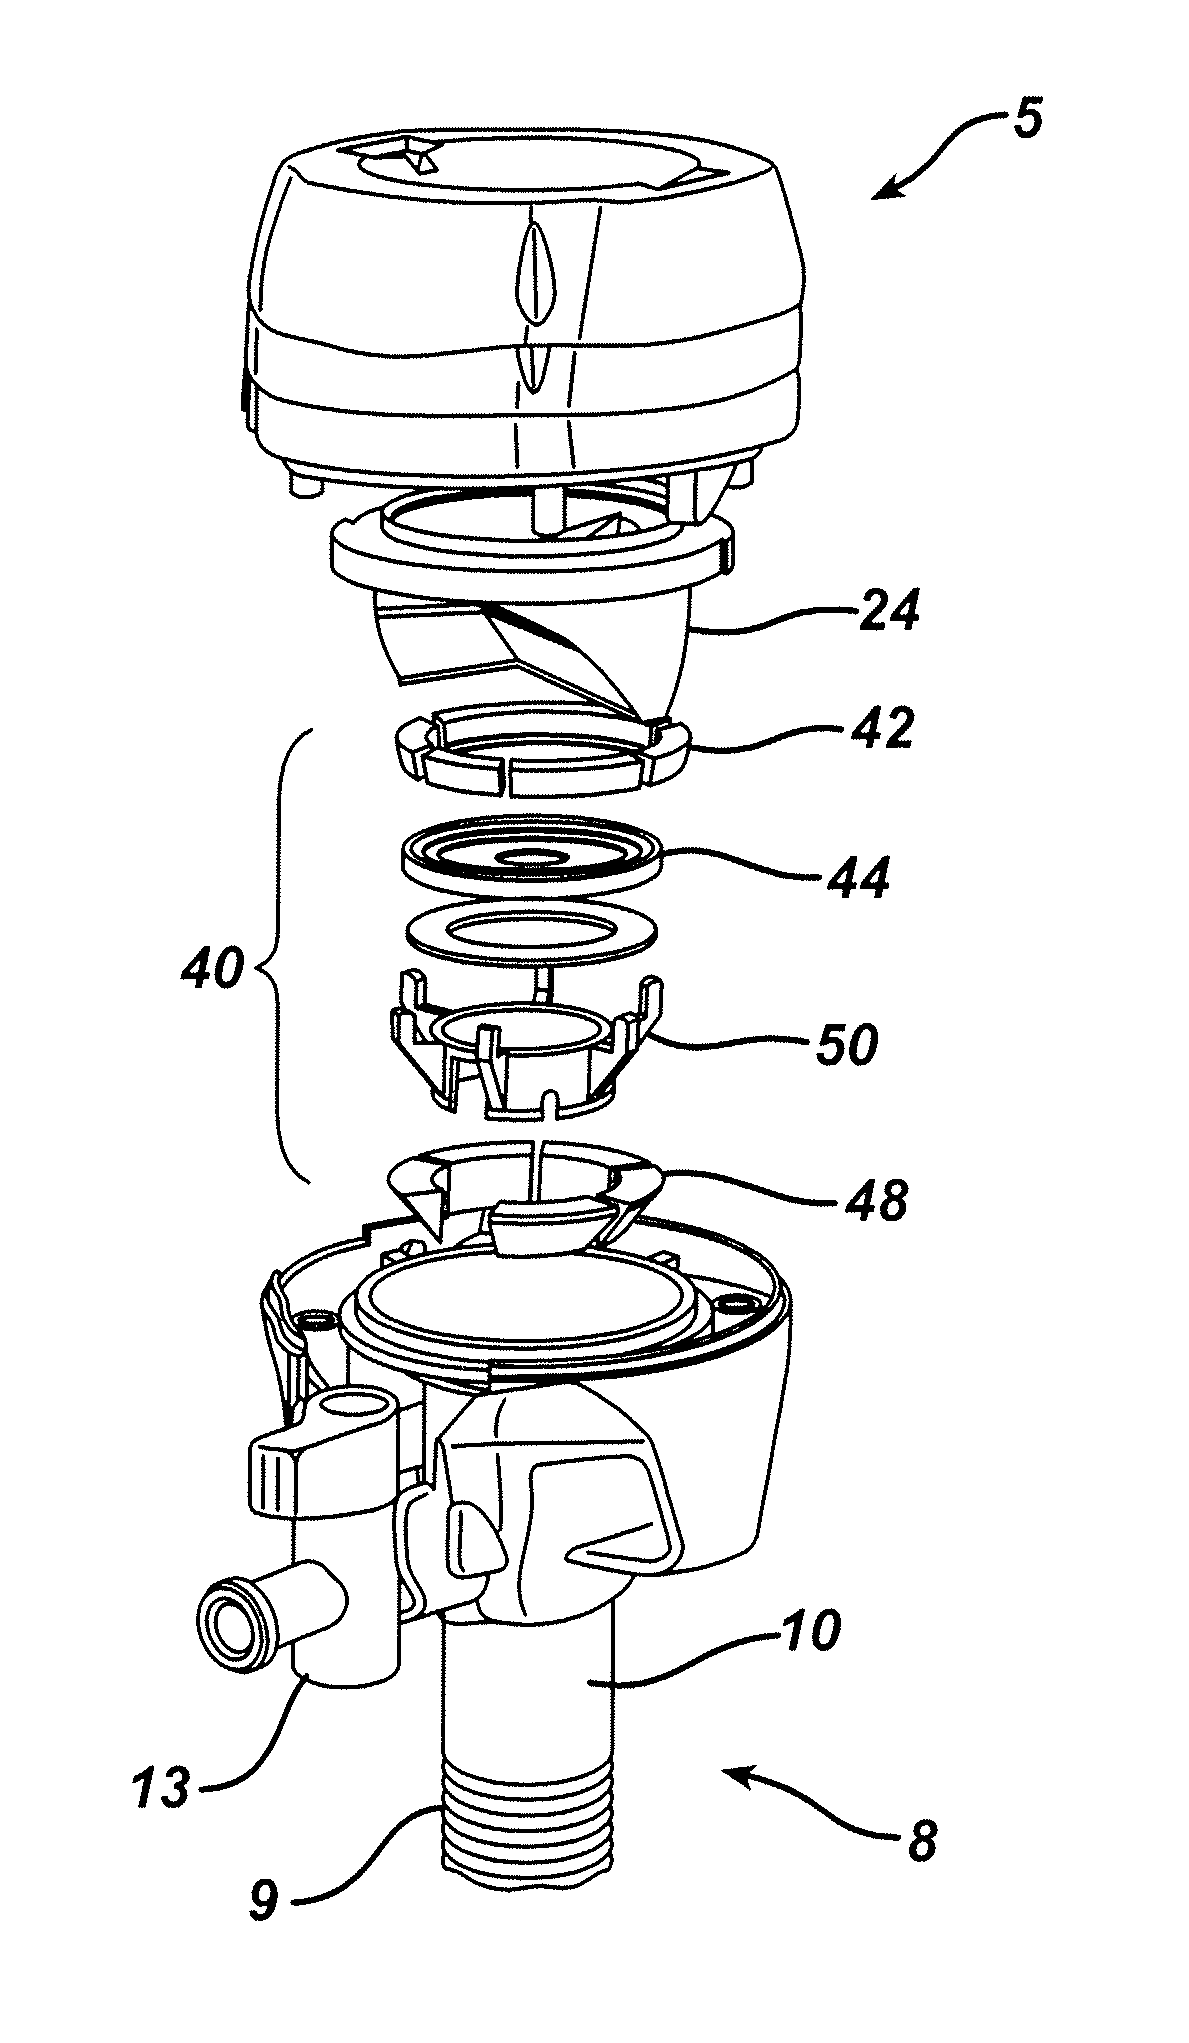 Absorbing fluids in a surgical access device